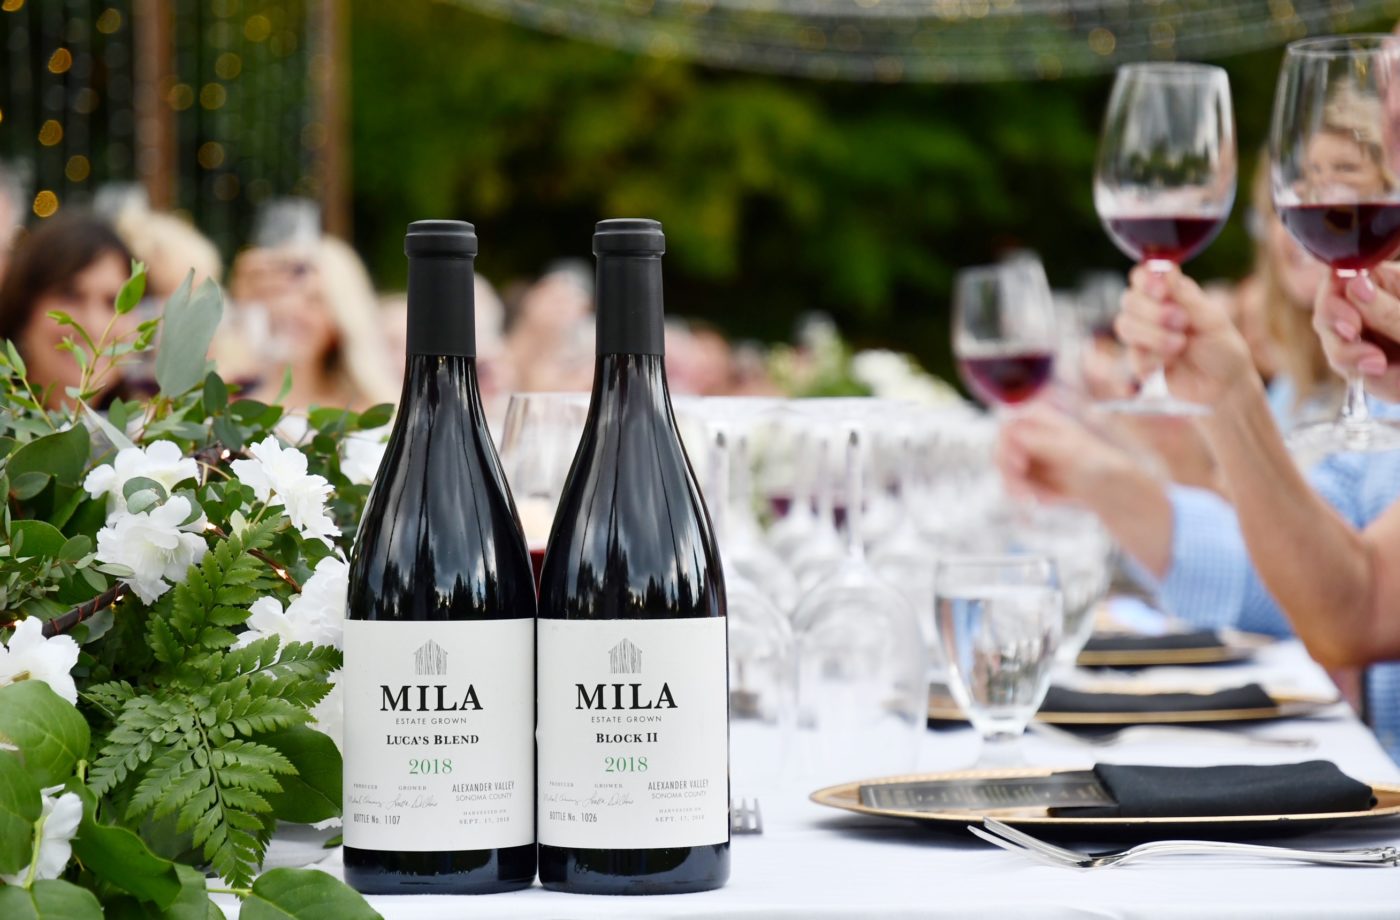 Mila wine at an outdoor dinner party